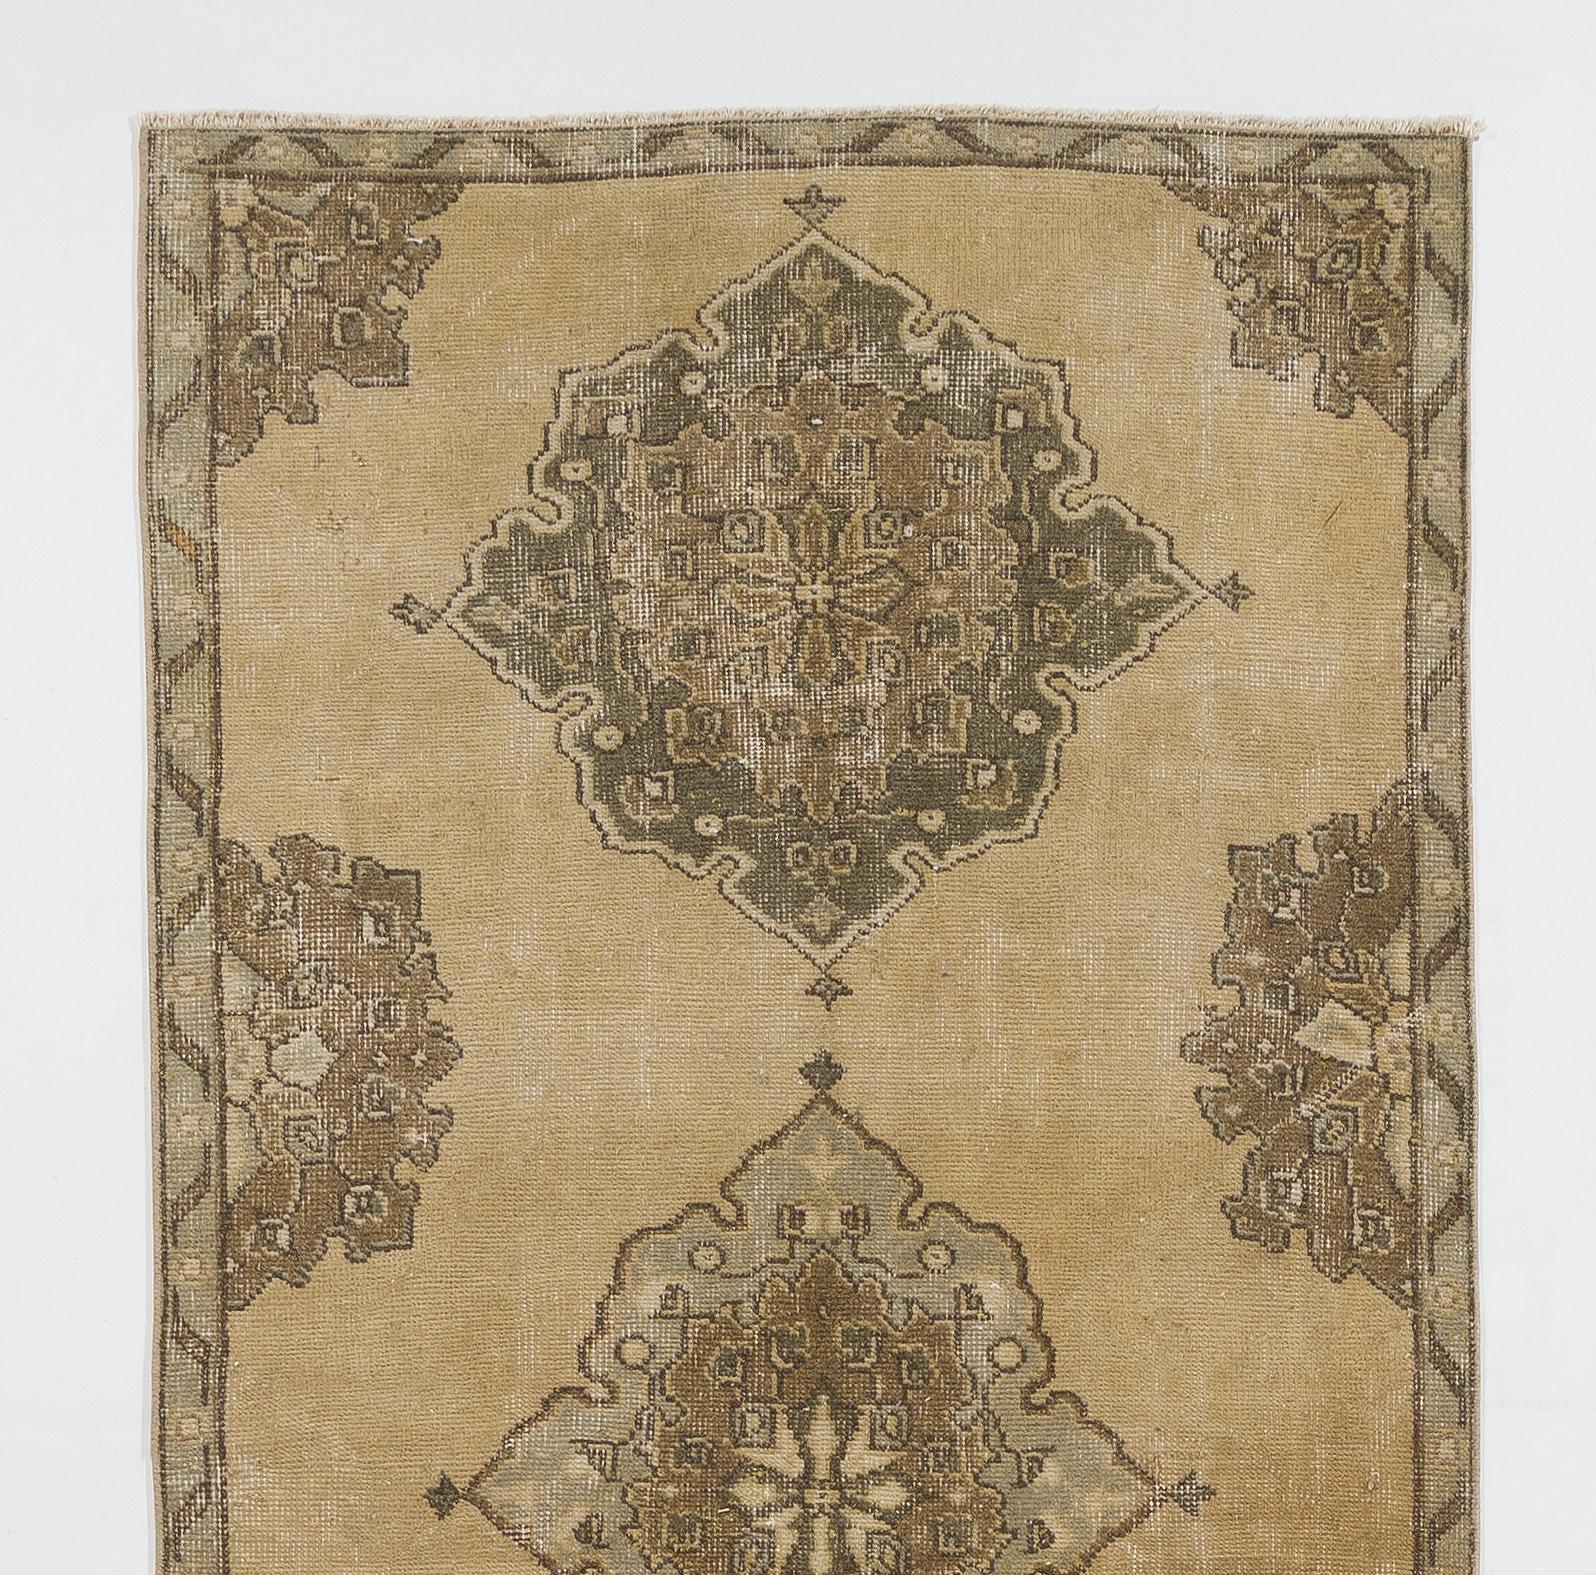 A Mid-20th century hand-knotted runner rug from Central Turkey with a nuanced color palette of neutral earthy colors including ivory, beige, taupe and light brown. The rug has low wool pile on wool foundation and has a design of multiple full and